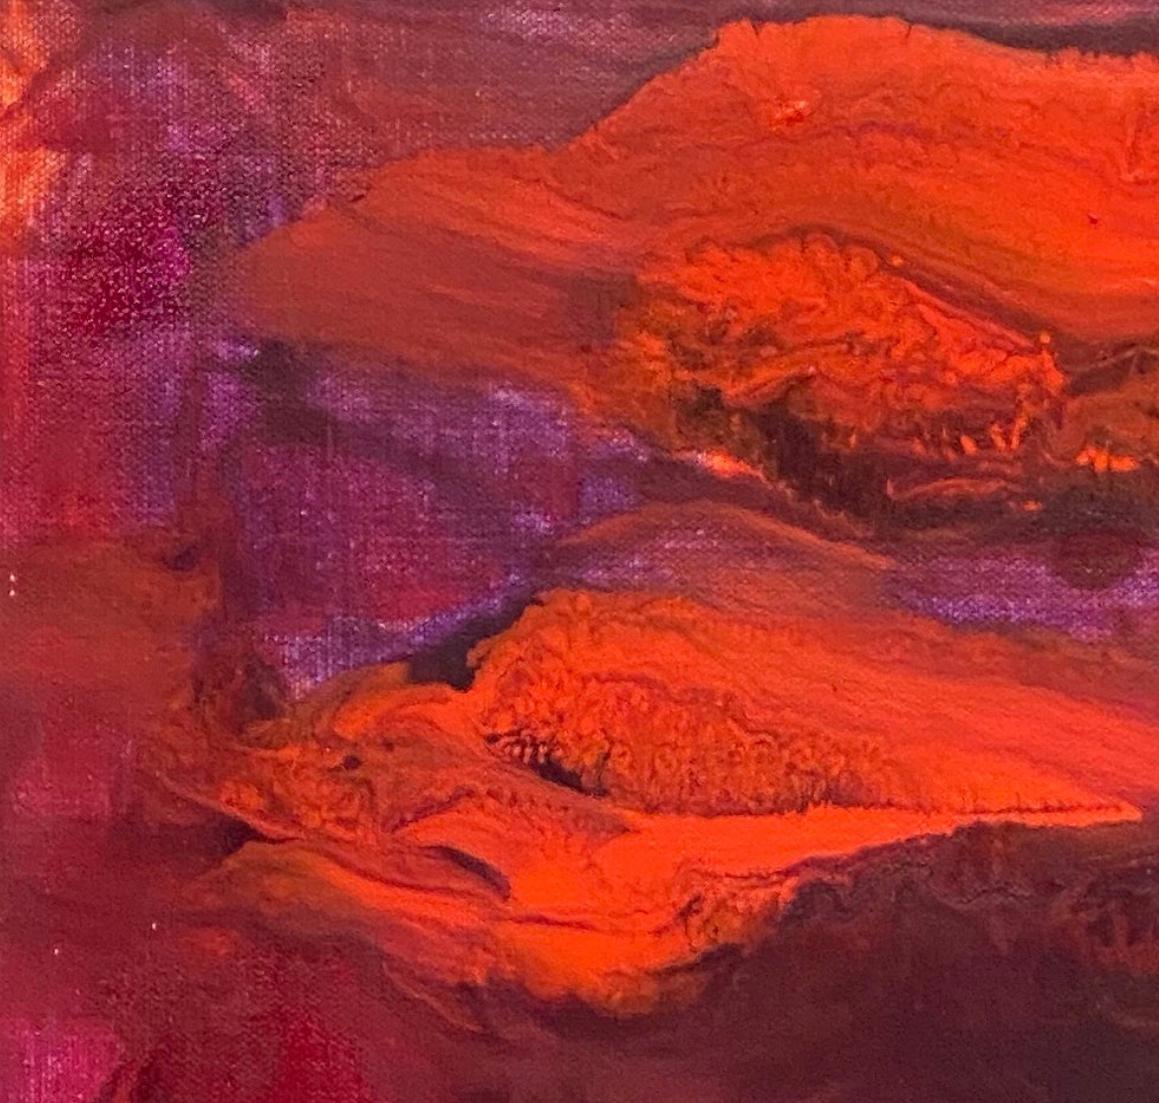 Sailor's delight, Contemporary painting with bold reds, oranges and violets 5